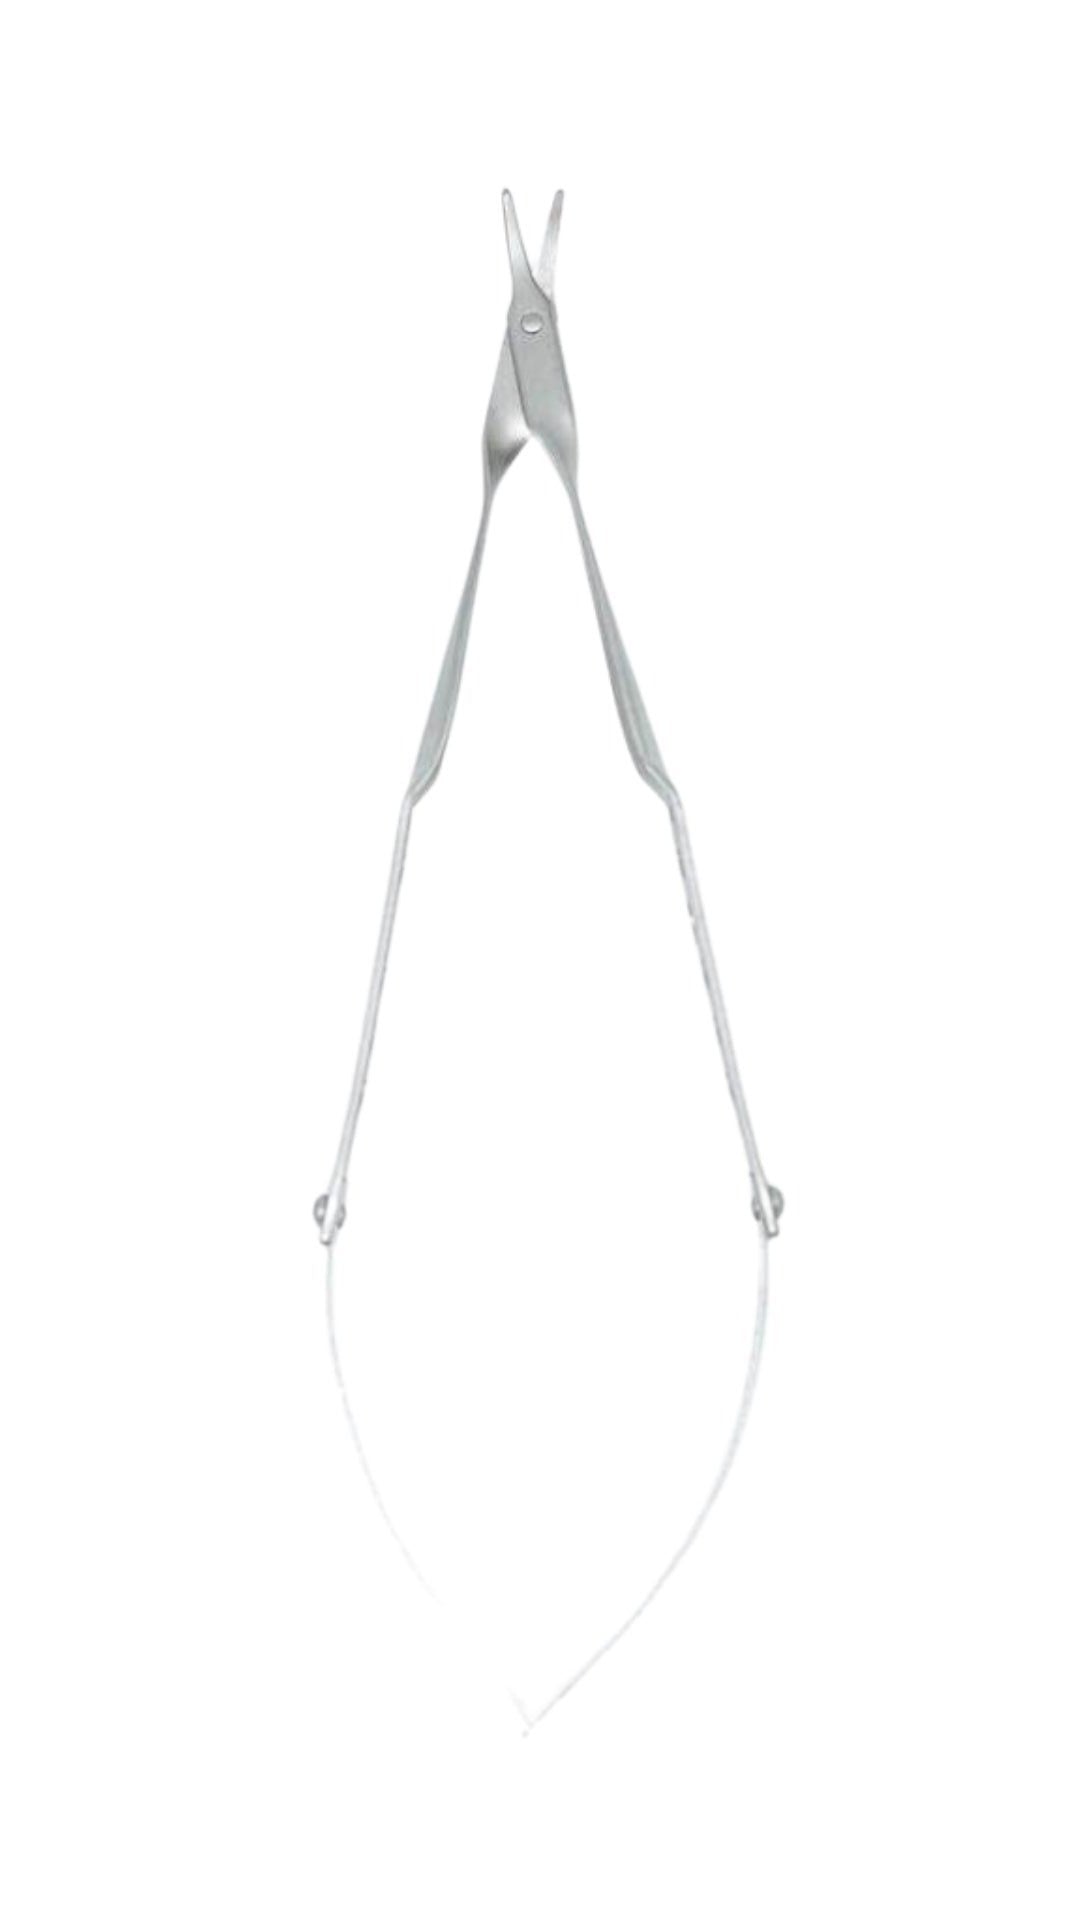 Laschal N-4CXF Suture Cutter with blunt-blunt tips for precise suture removal, 13.5cm length, weighing 12 grams, designed to minimize tissue trauma